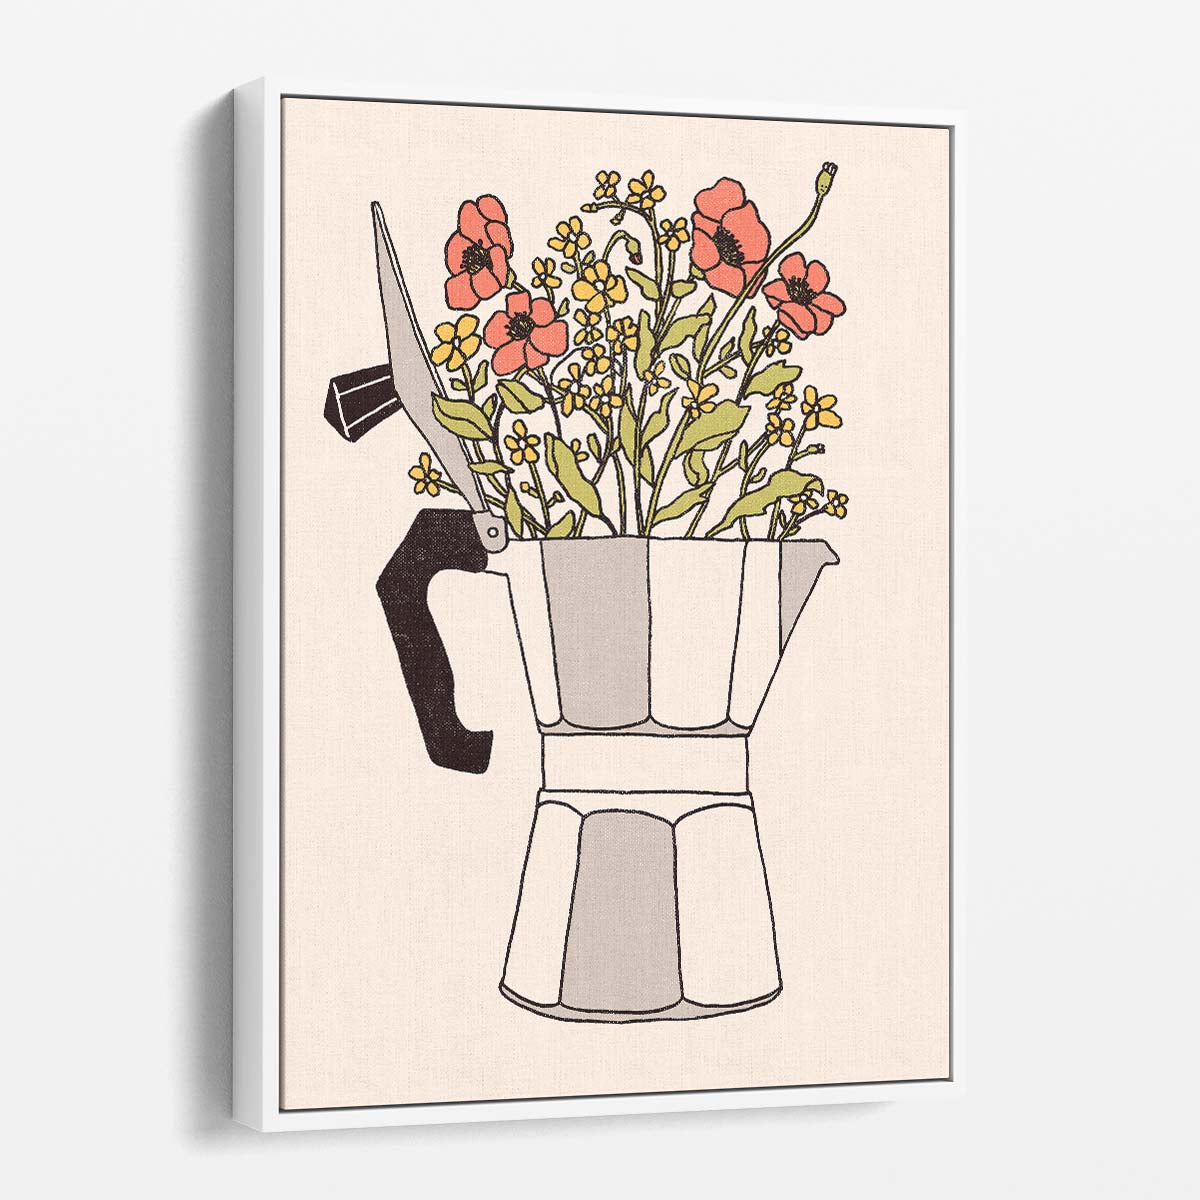 Colorful Floral Vase Illustration Wall Art by Florent Bodart by Luxuriance Designs, made in USA